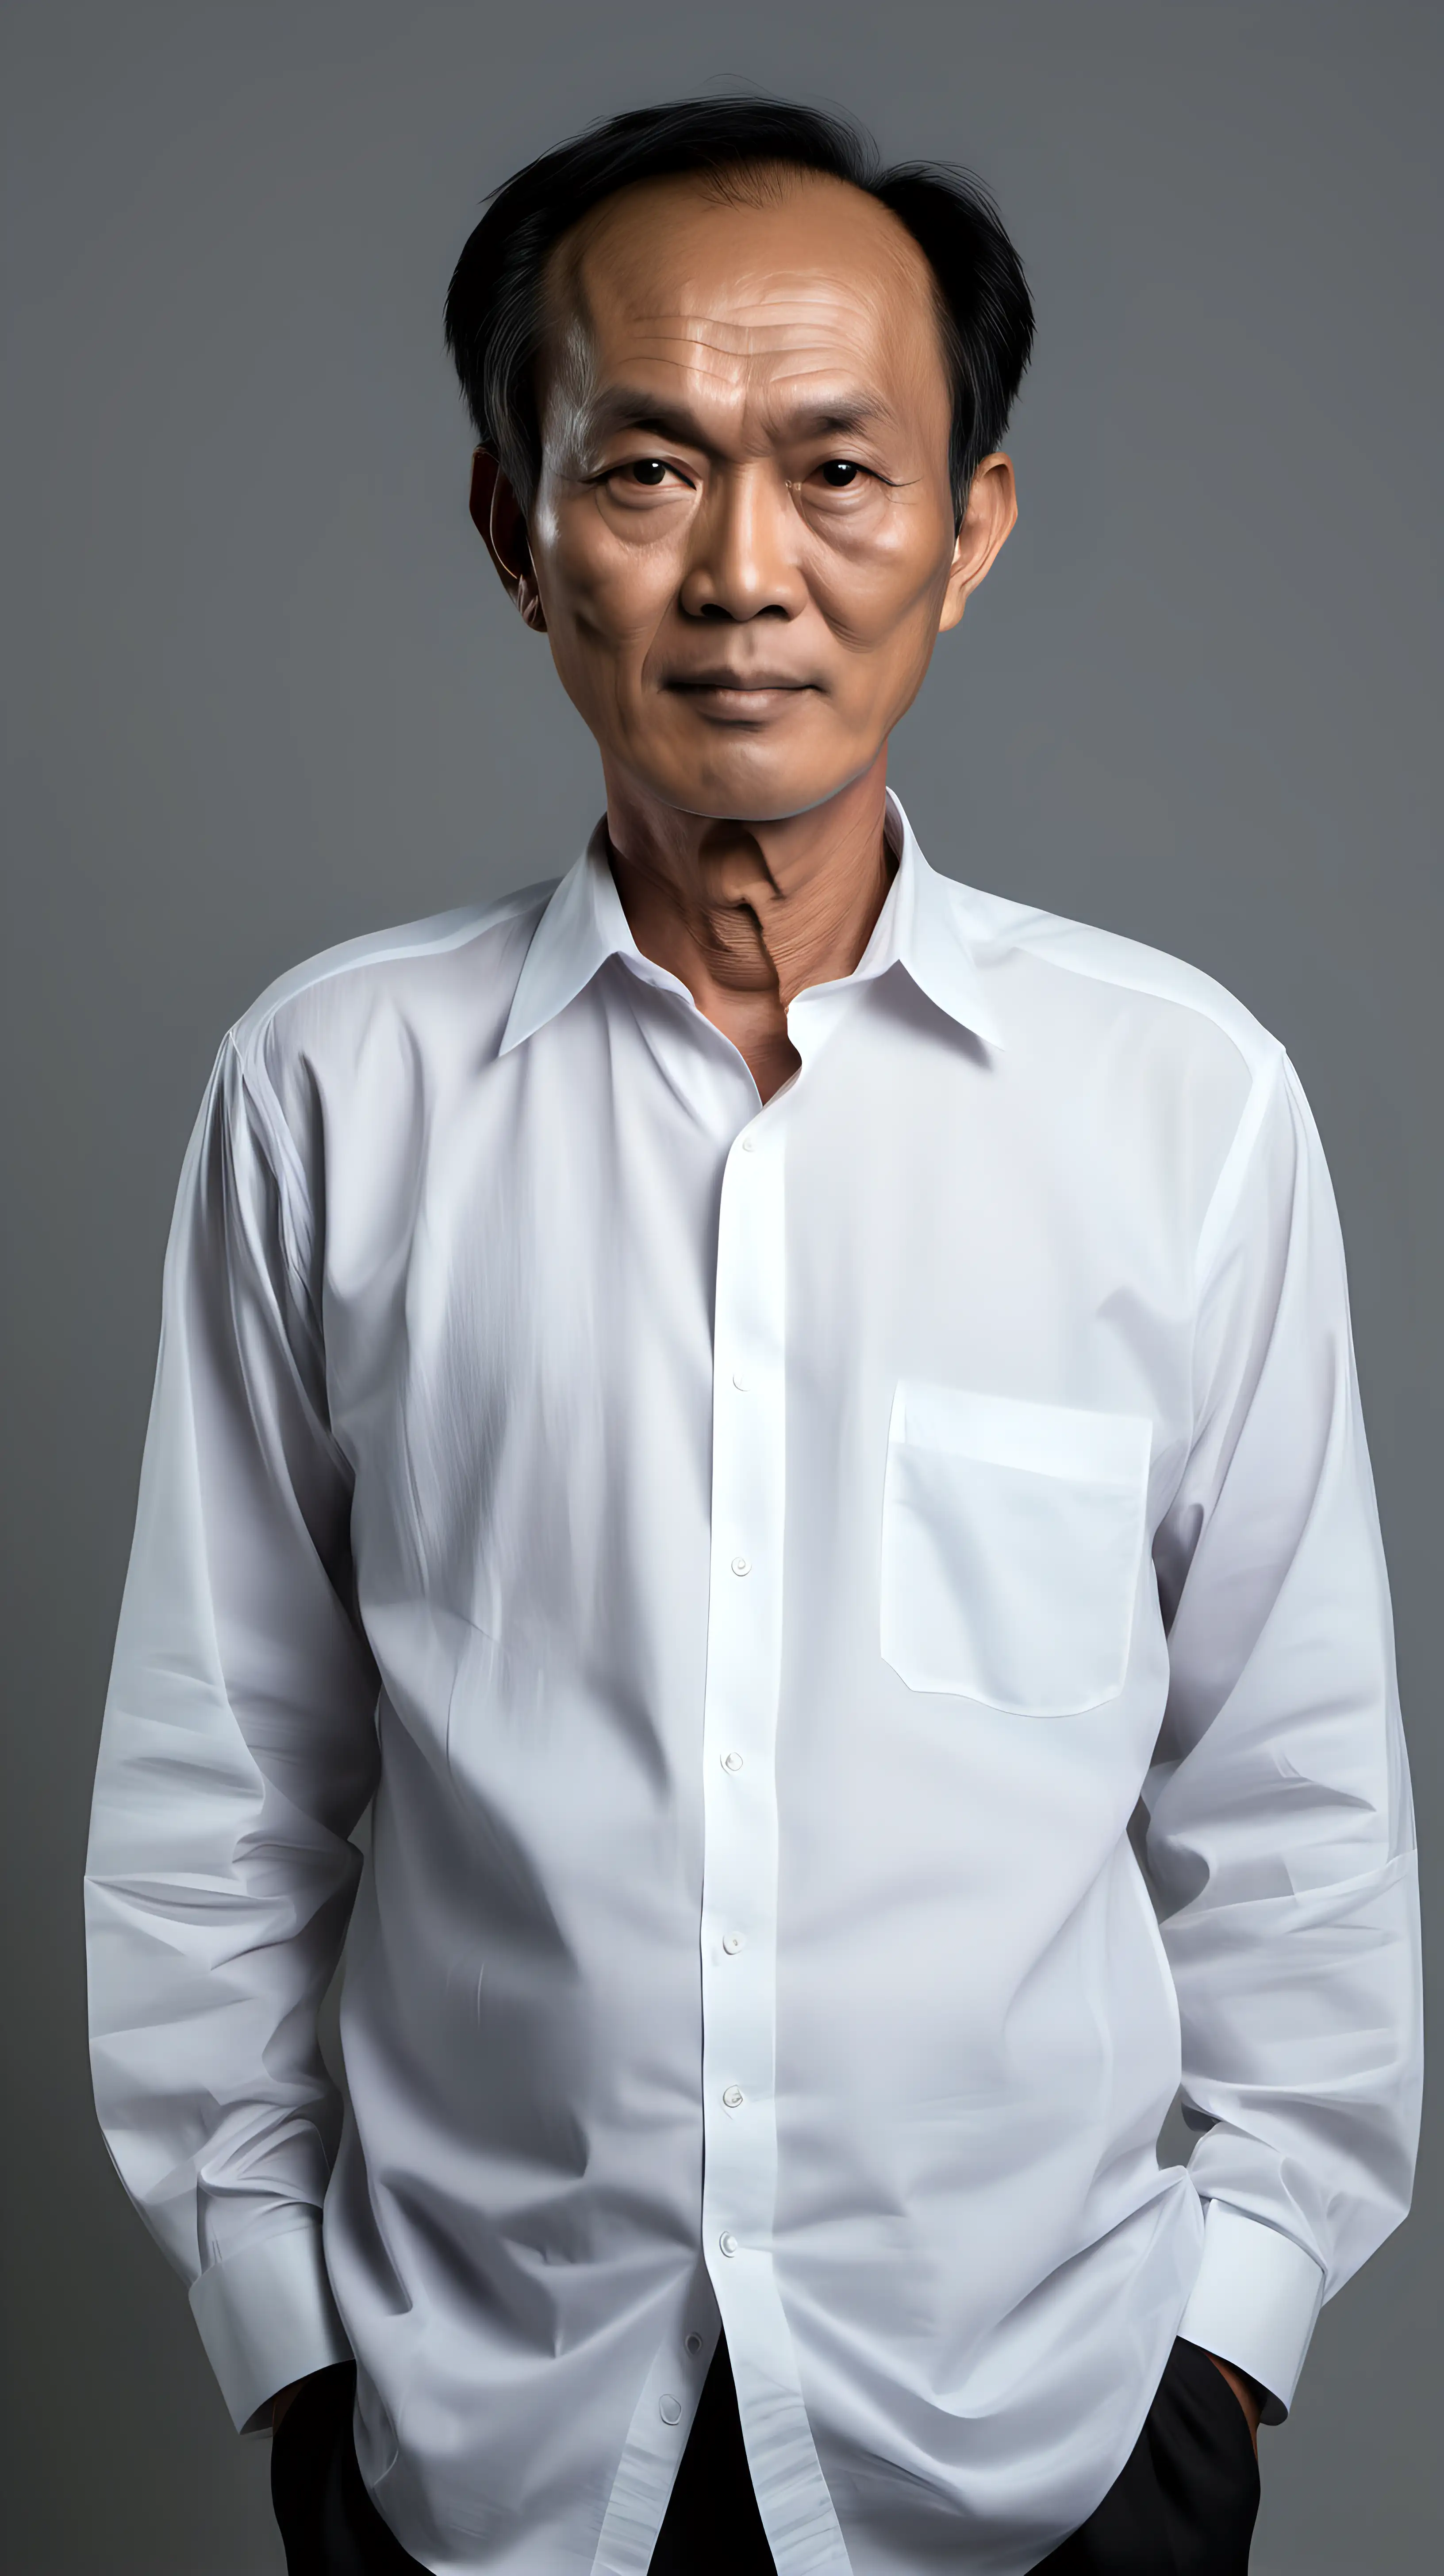 a 60 year old south east asian man with skinny figure, black short thin sleek hair, full face big forehead, wearing white shirt untucked, standing 